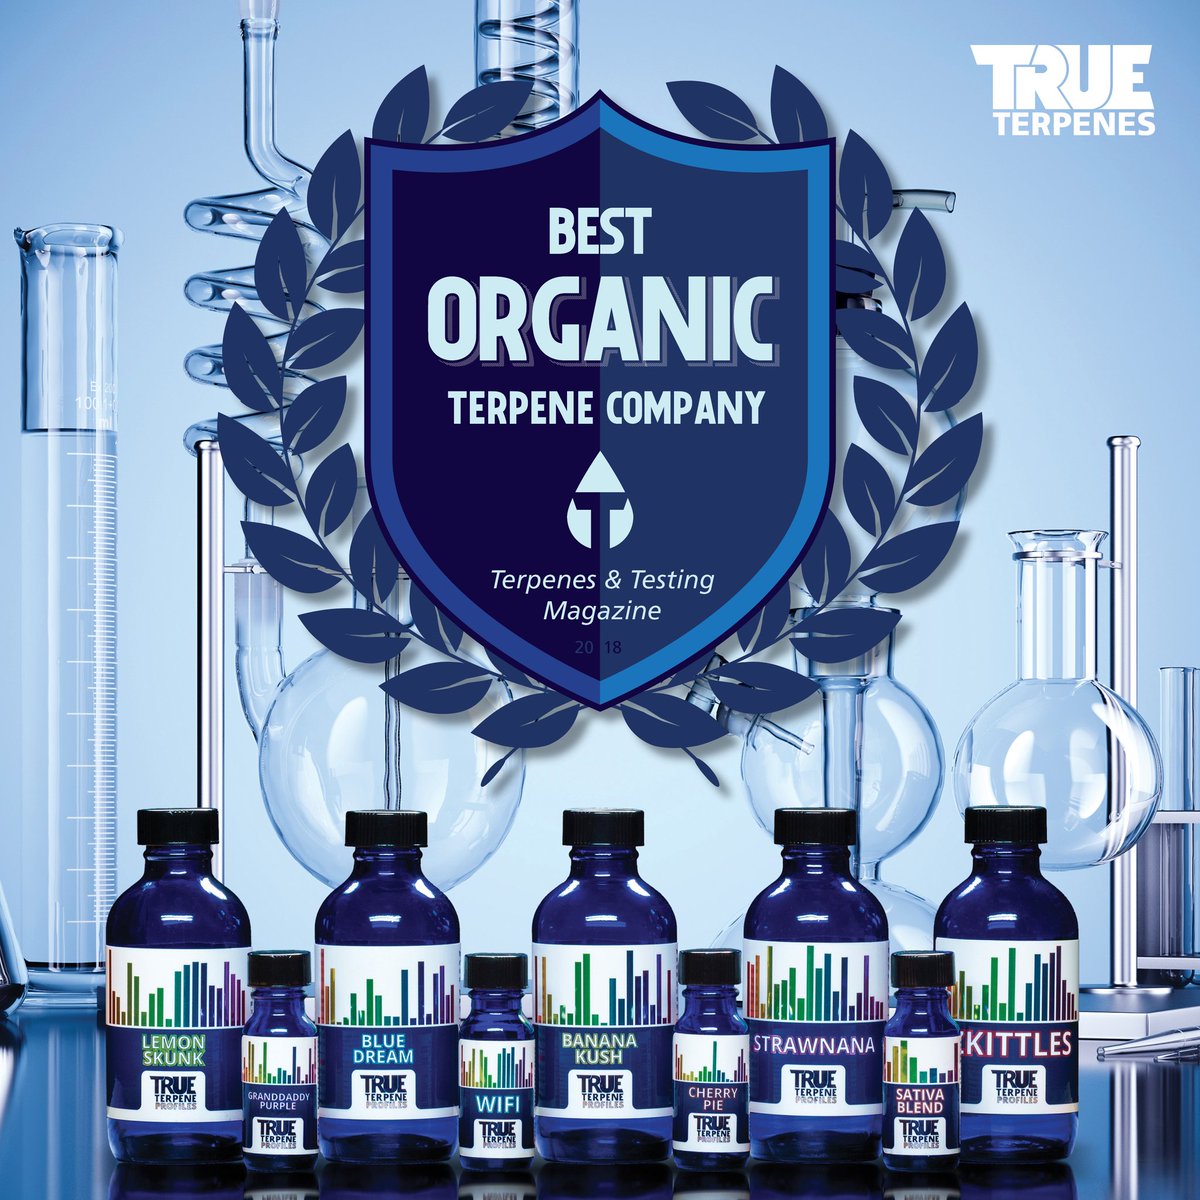 Congrats to @TrueTerpenes for winning the #TerpWorldCon2018 Best Organic Terpene Company! Learn more about them in the next issue of #TerpenesandTestingMag available now!